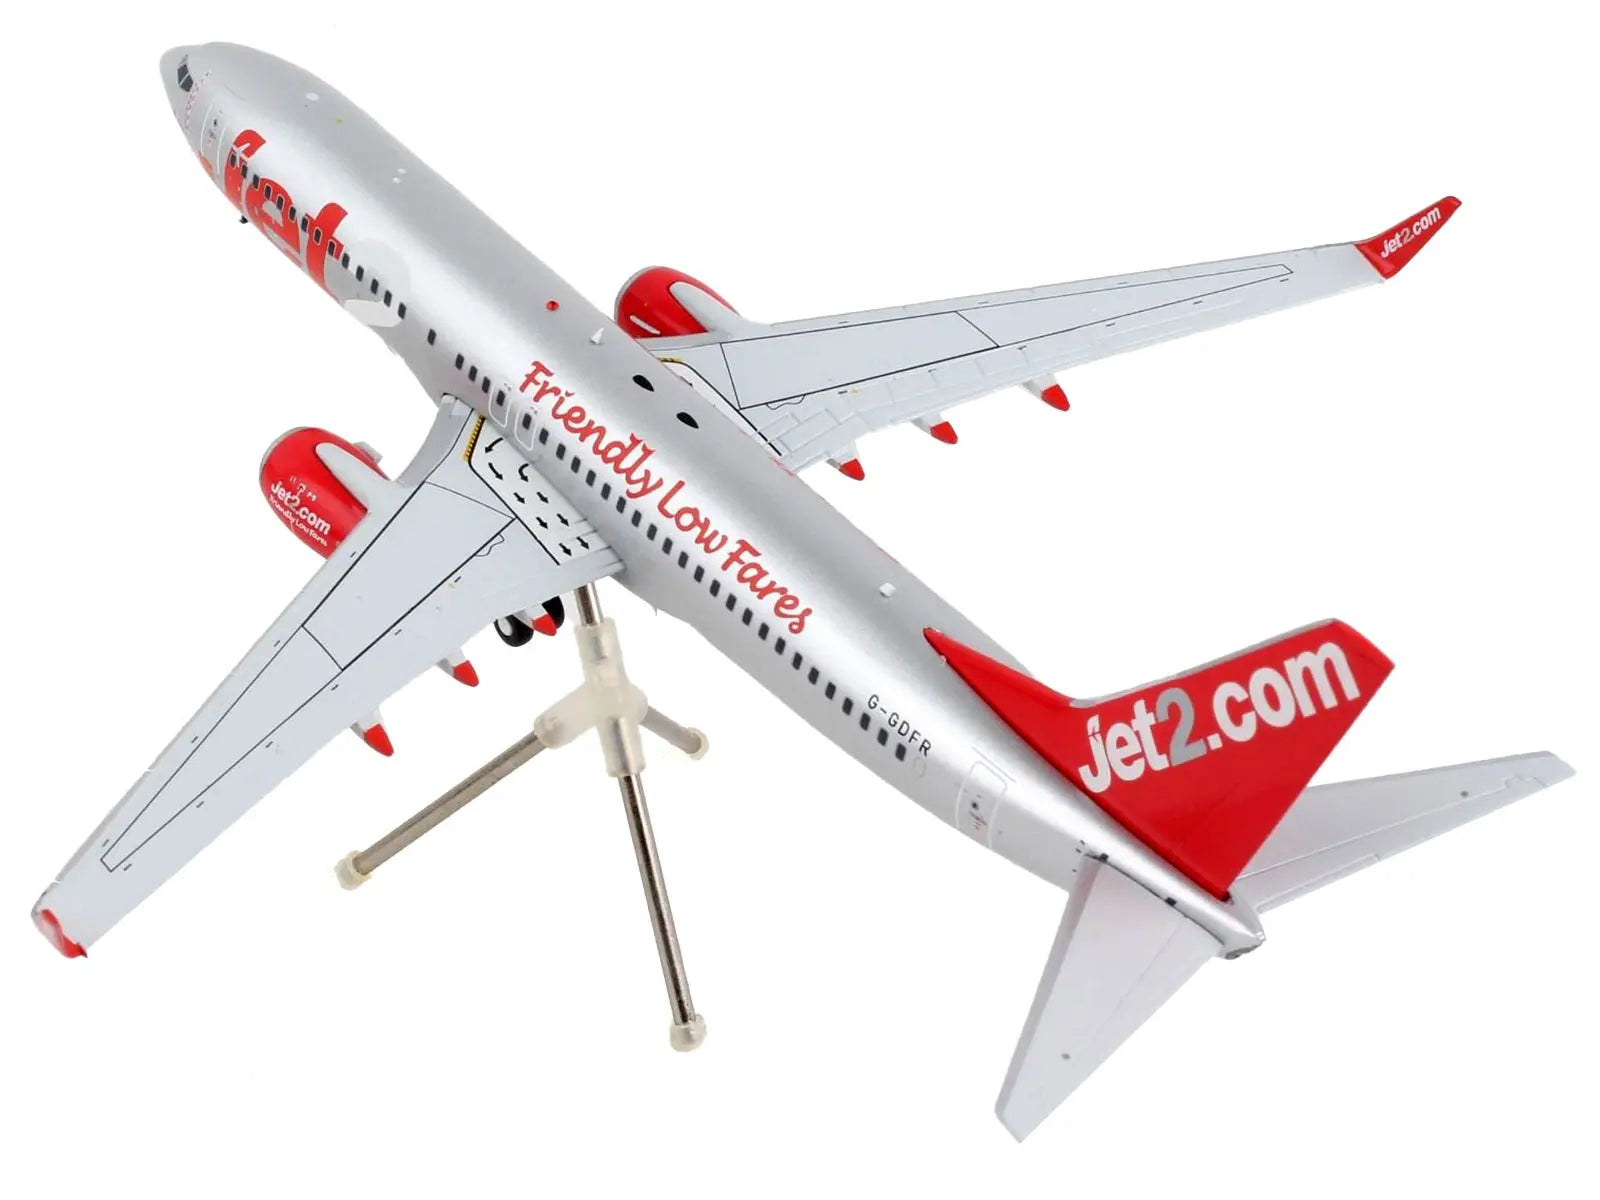 Boeing 737-800 Commercial Aircraft "Jet2.Com" Silver with Red Tail "Gemini 200" Series 1/200 Diecast Model Airplane by GeminiJets GeminiJets